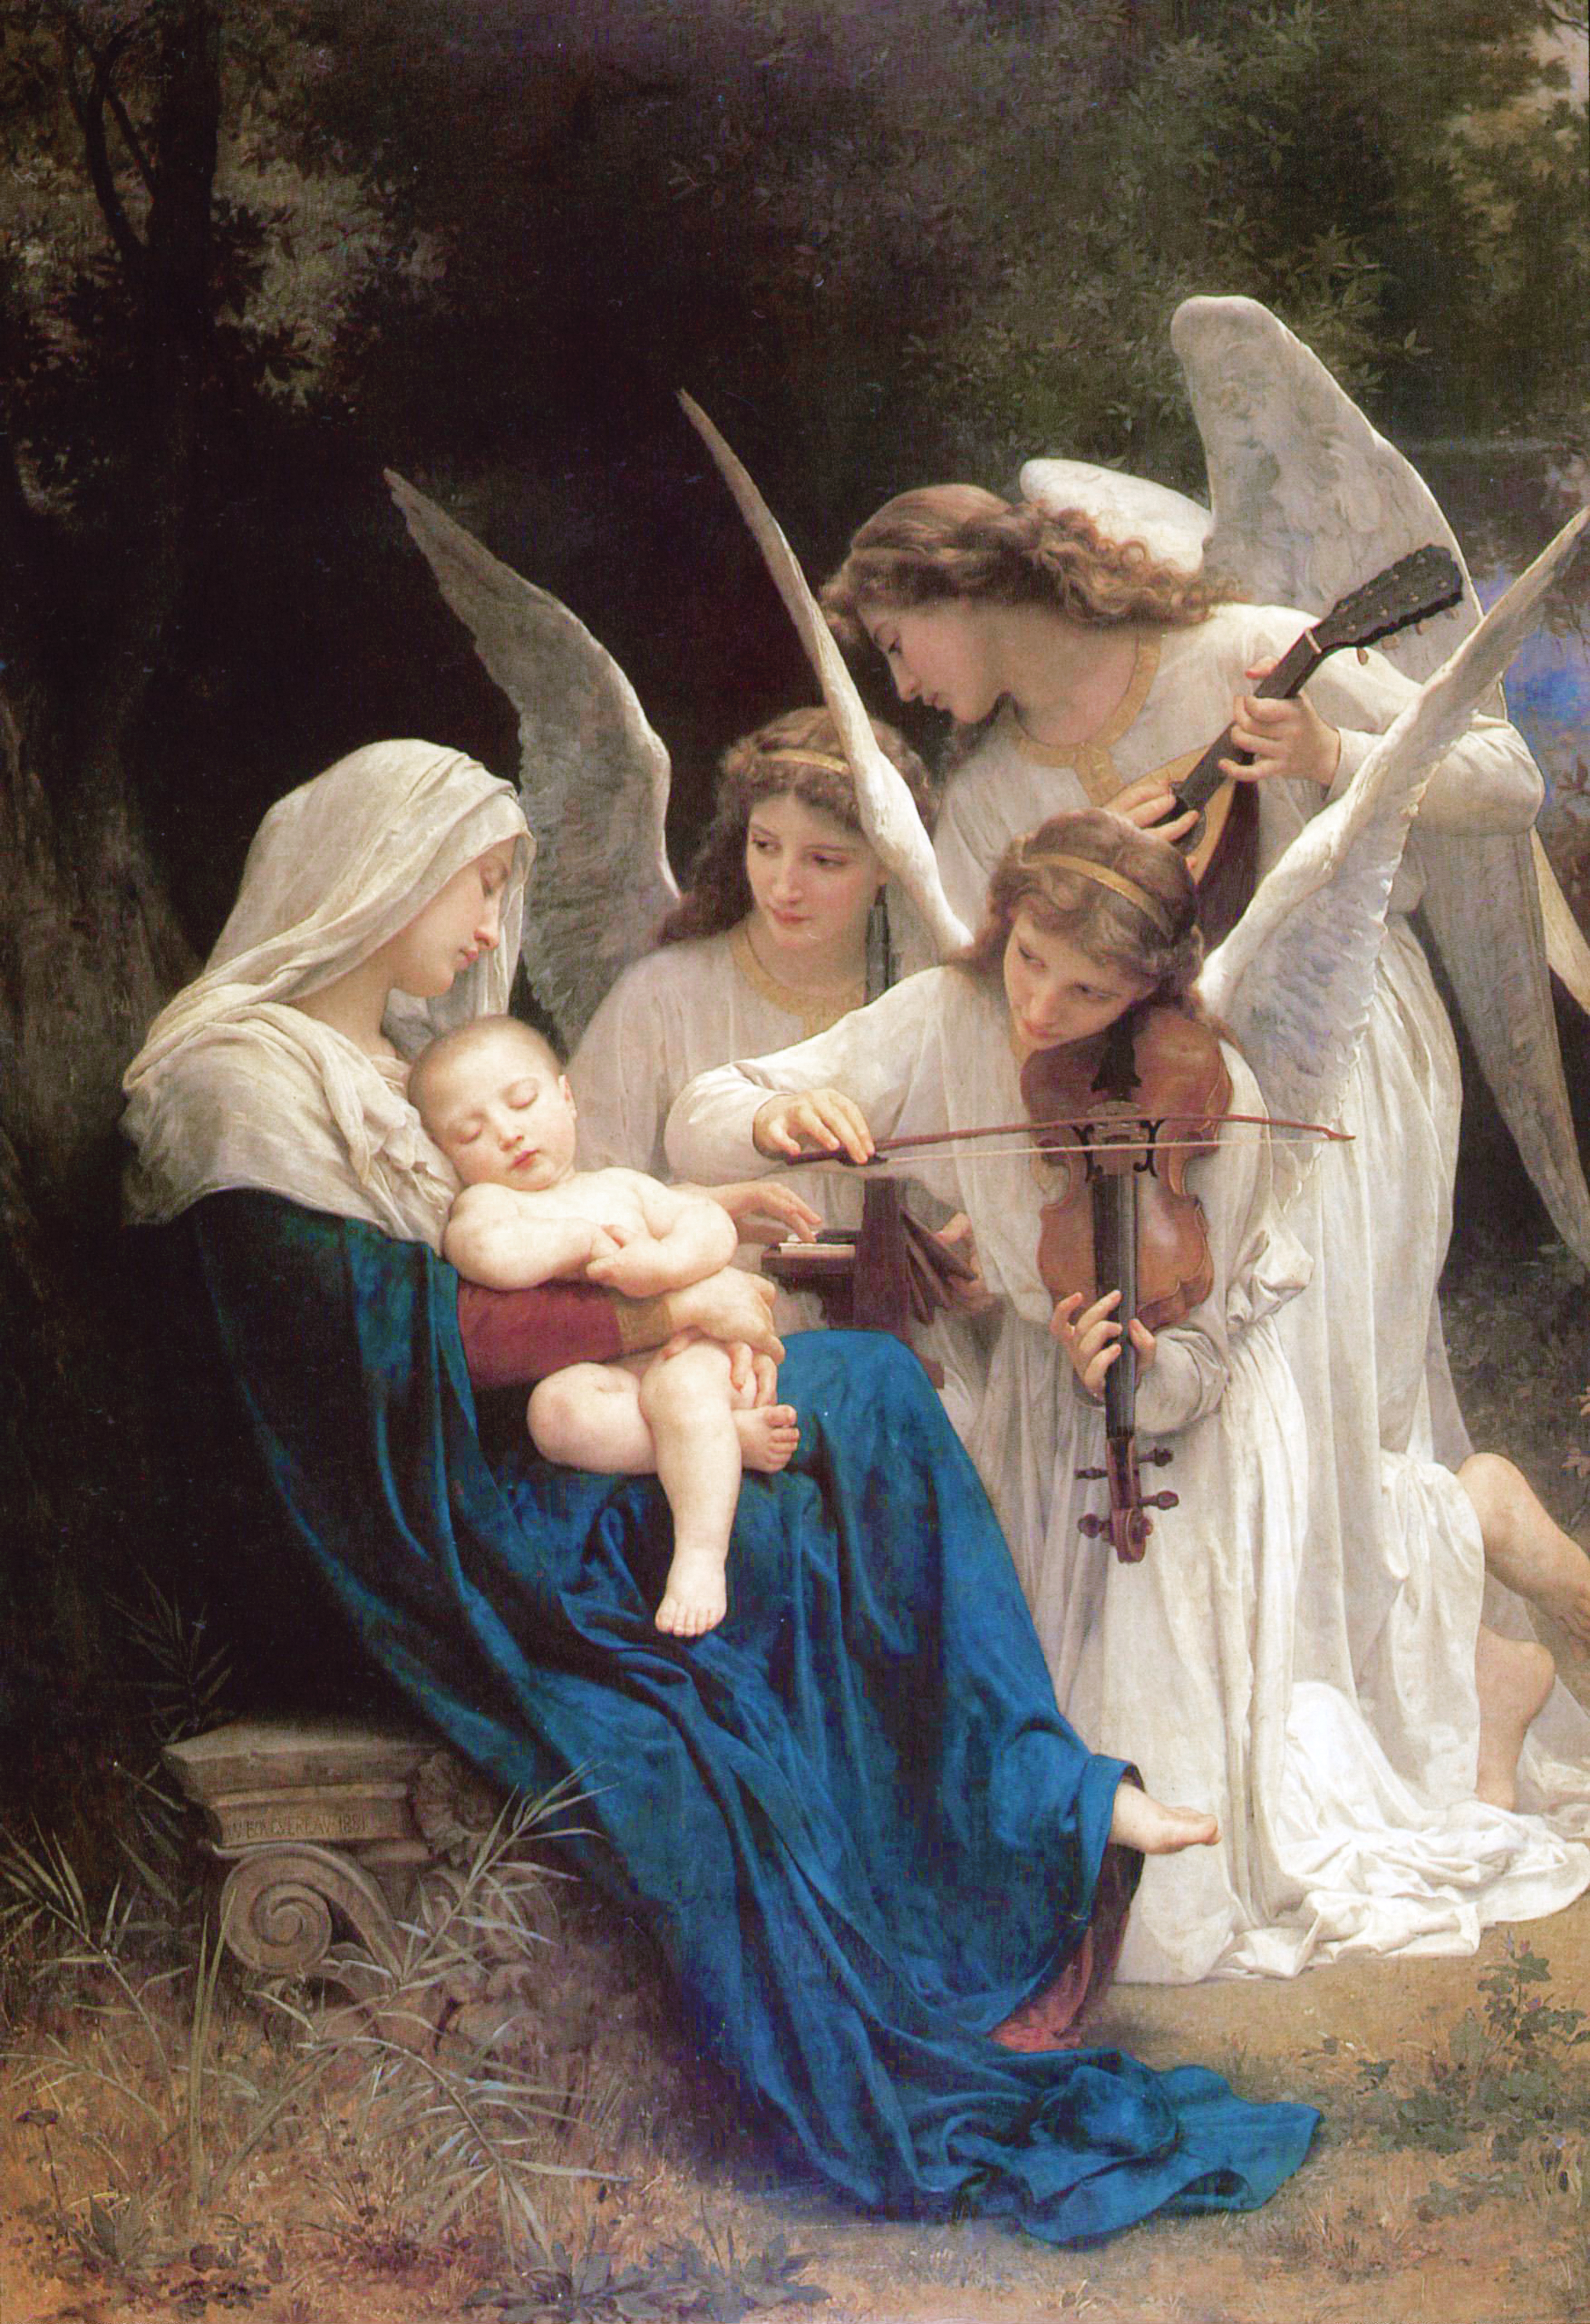 http://upload.wikimedia.org/wikipedia/commons/0/05/William-Adolphe_Bouguereau_(1825-1905)_-_Song_of_the_Angels_(1881).jpg